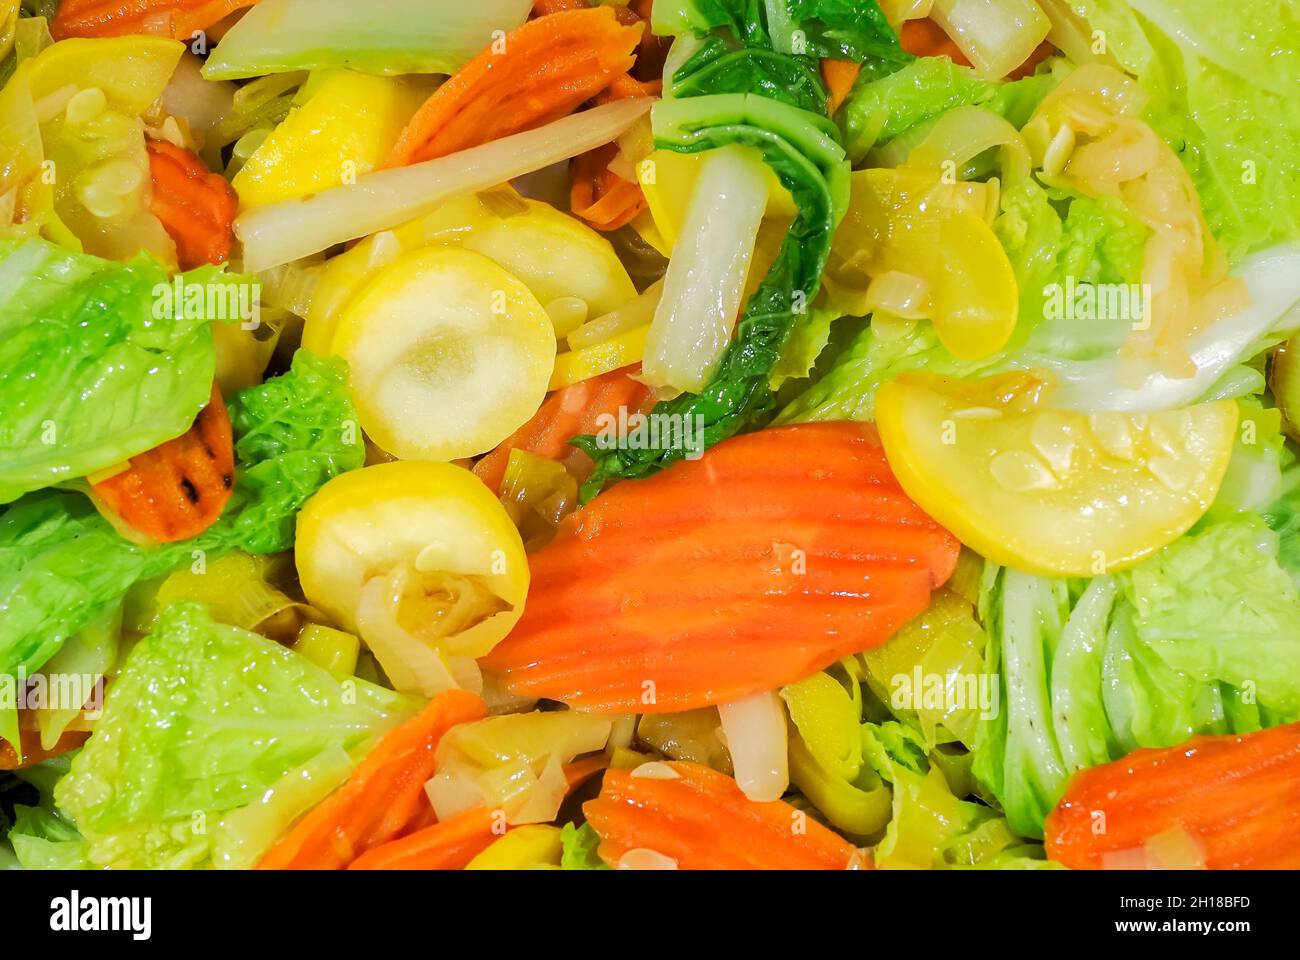 Cloae up of vegetable stir fry with carrots, onions, zucchine and chinese cabbage Stock Photo